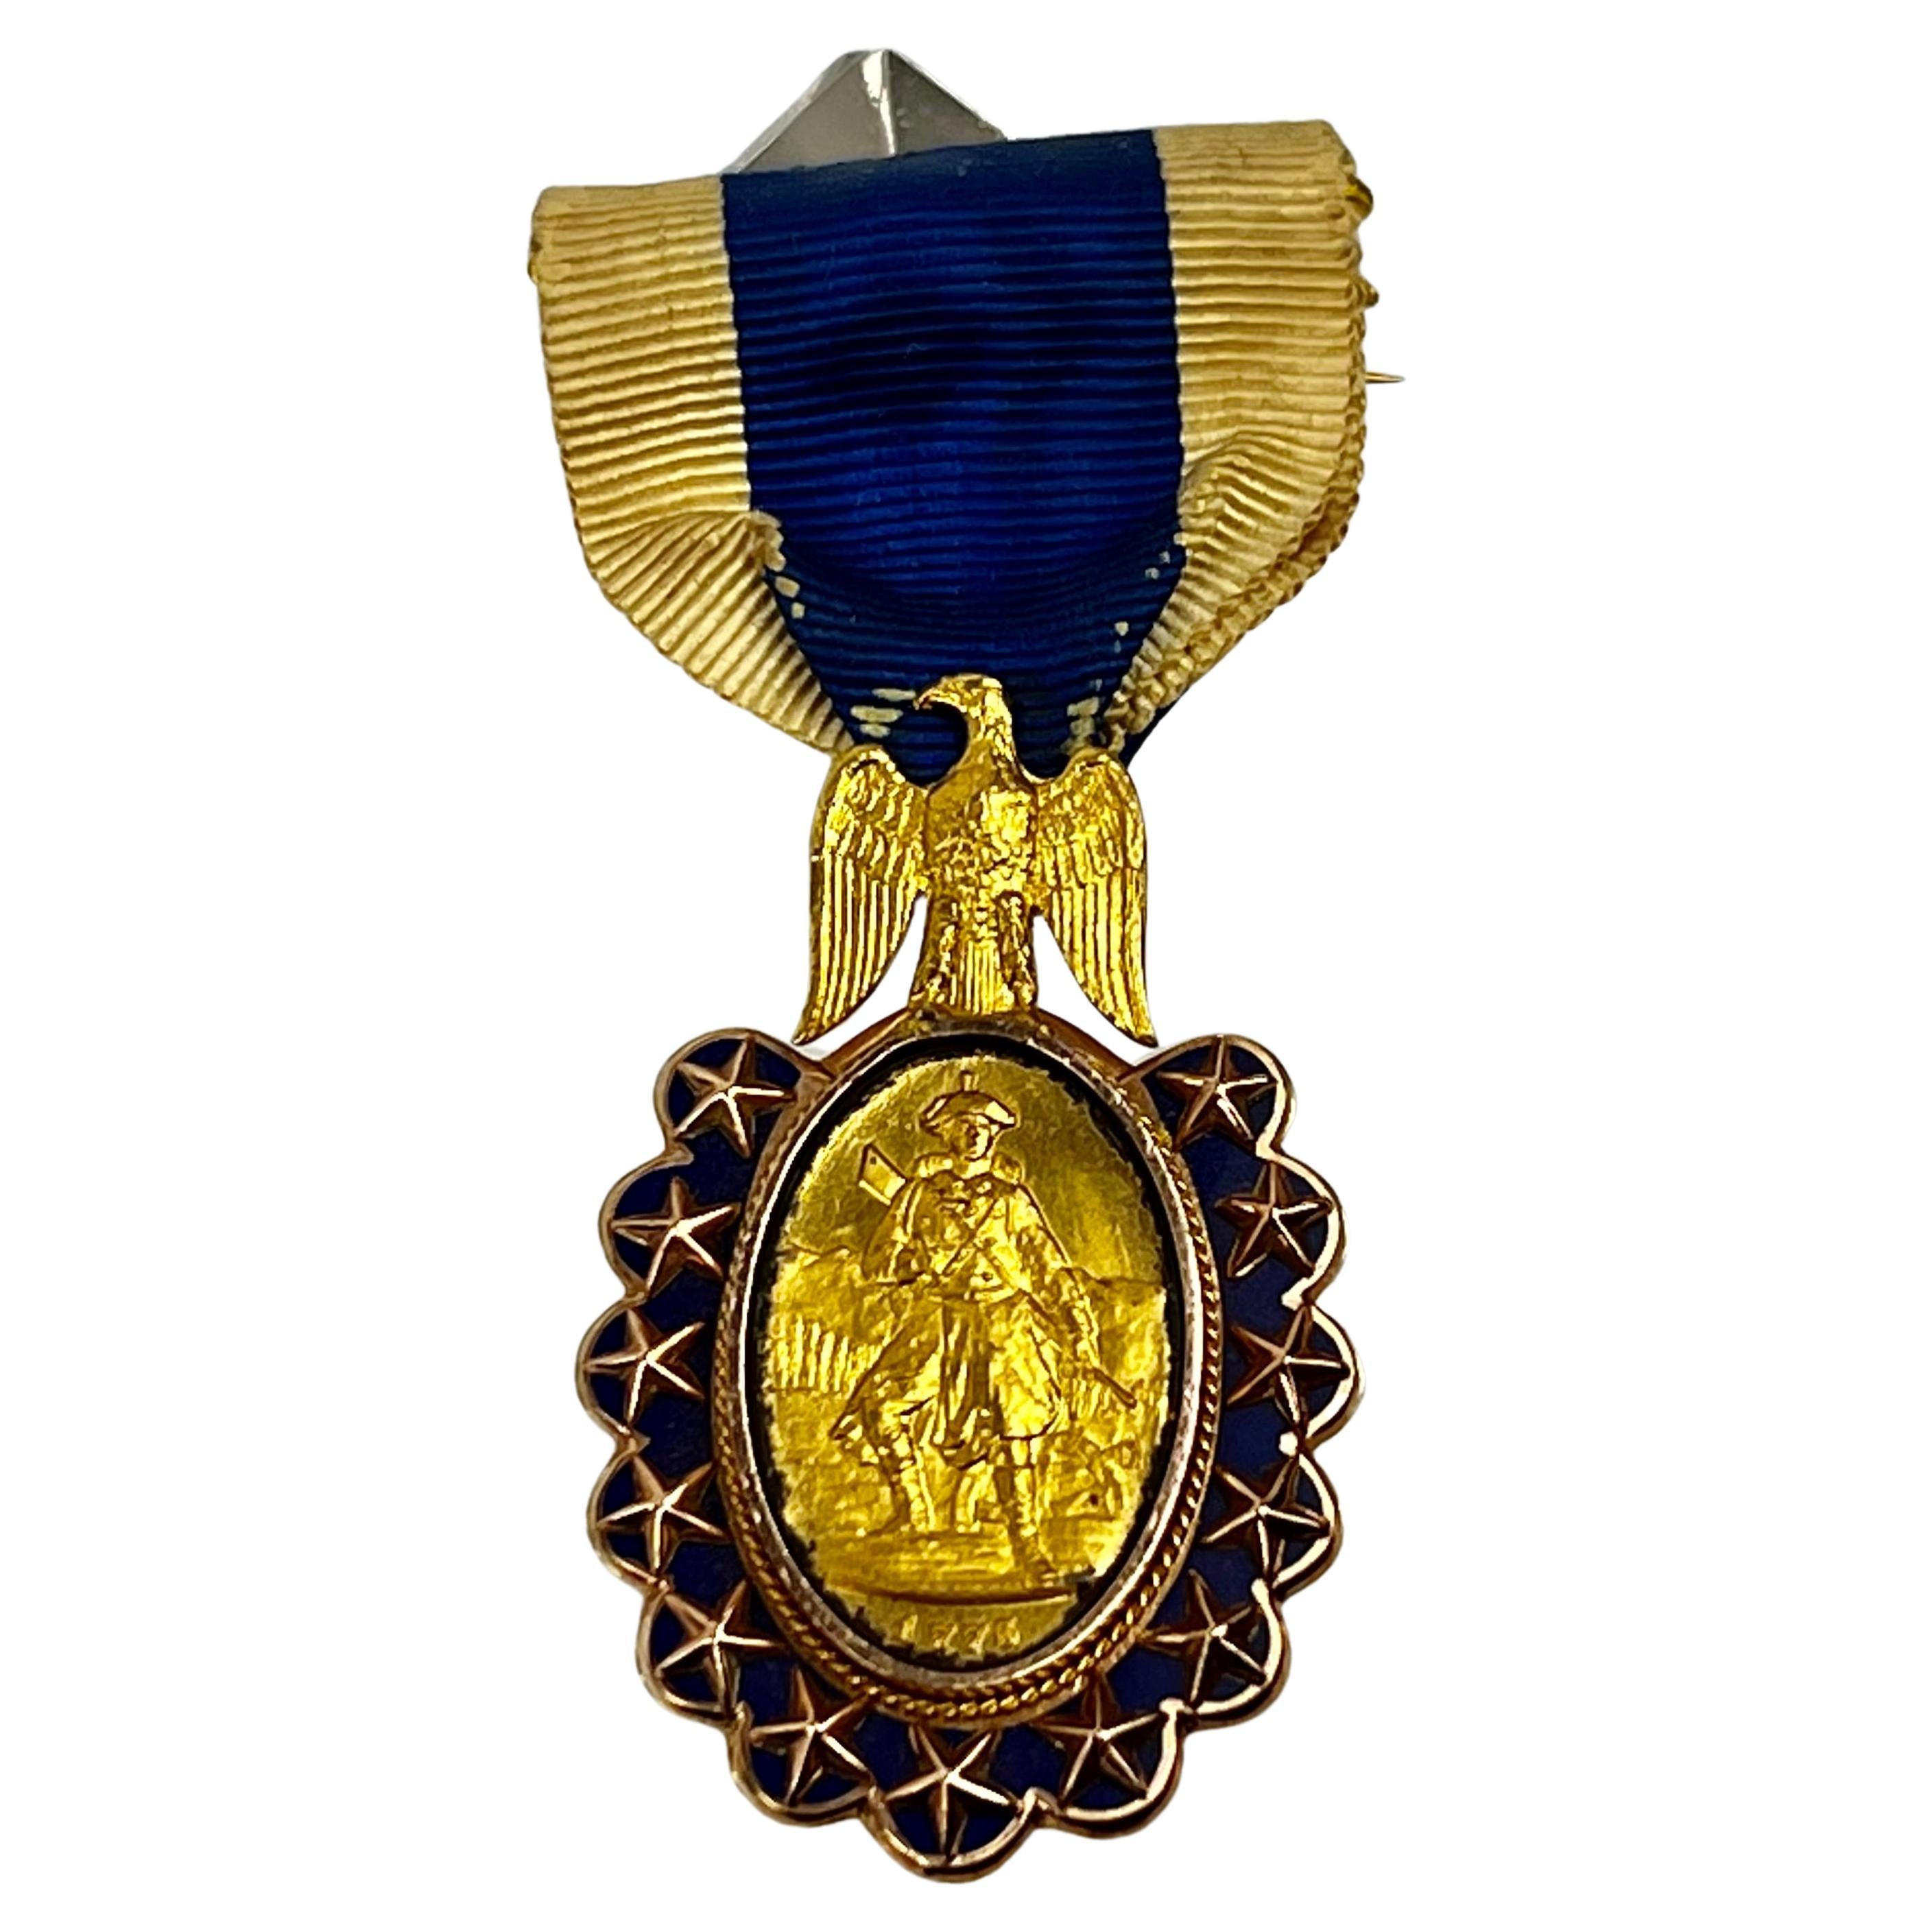 Sons of the Revolution Medal, Bailey, Banks & Biddle, 1883